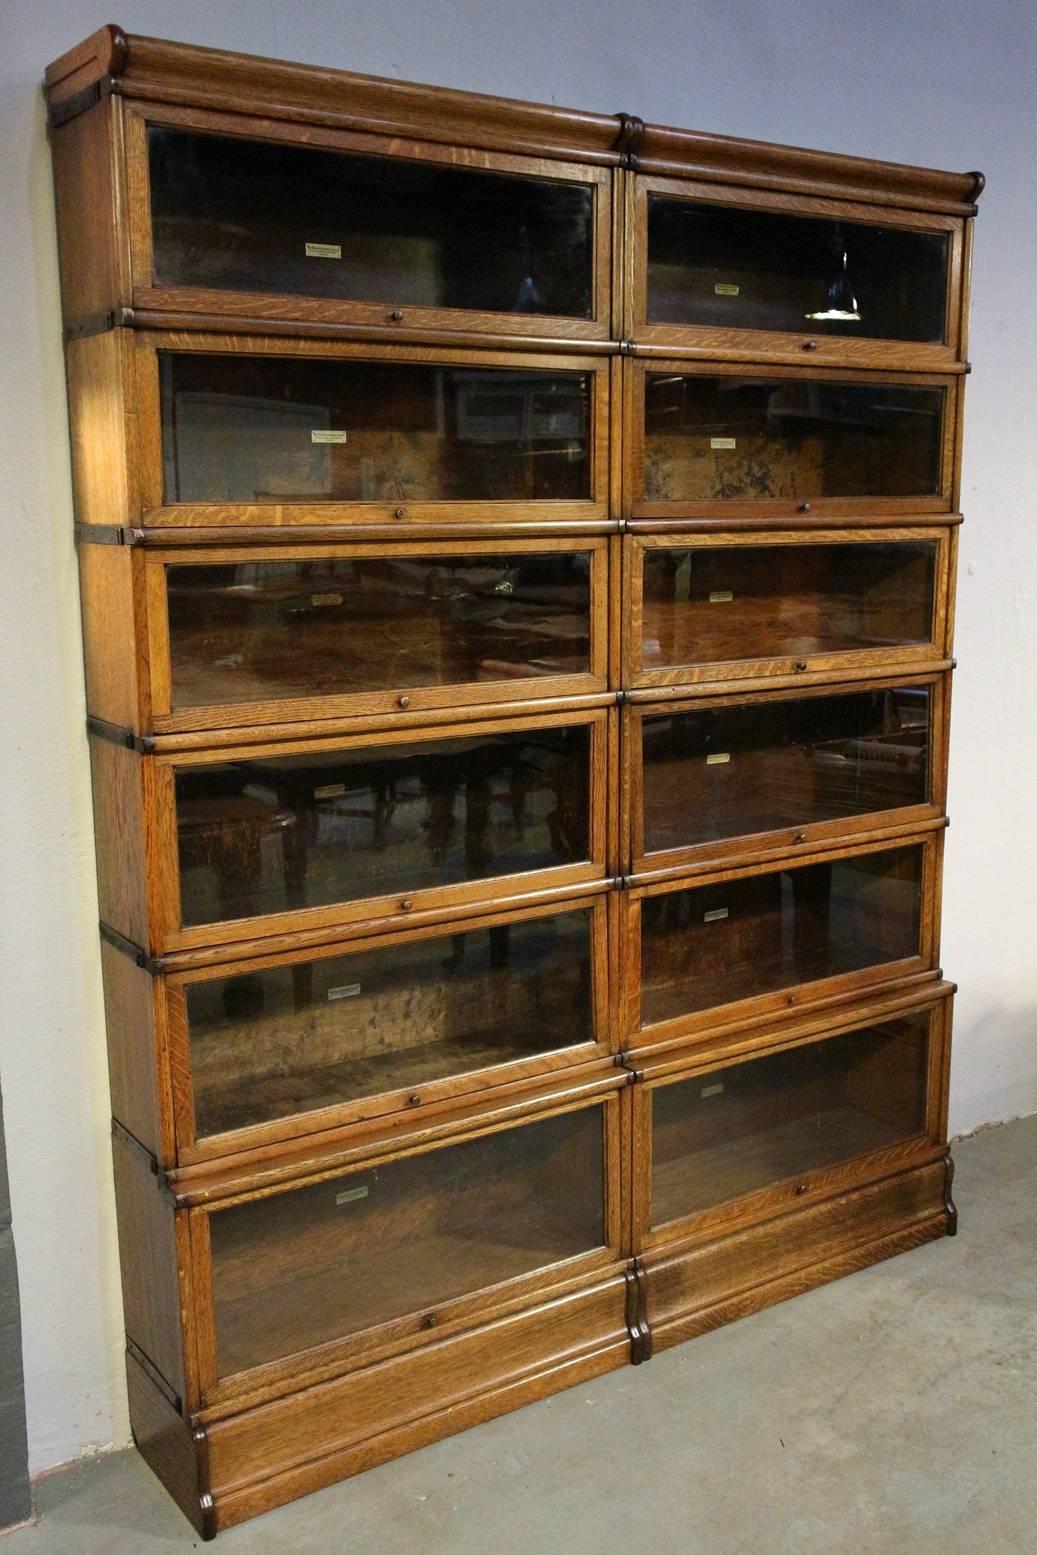 Antique light oak globe Wernicke bookcase in perfect condition.
The cabinet consists of 12 stackable parts arranged in two rows of six.
Origin: England
Period: circa 1895-1910.
Measure. W 173cm, H 220cm, D 29cm / 24cm.